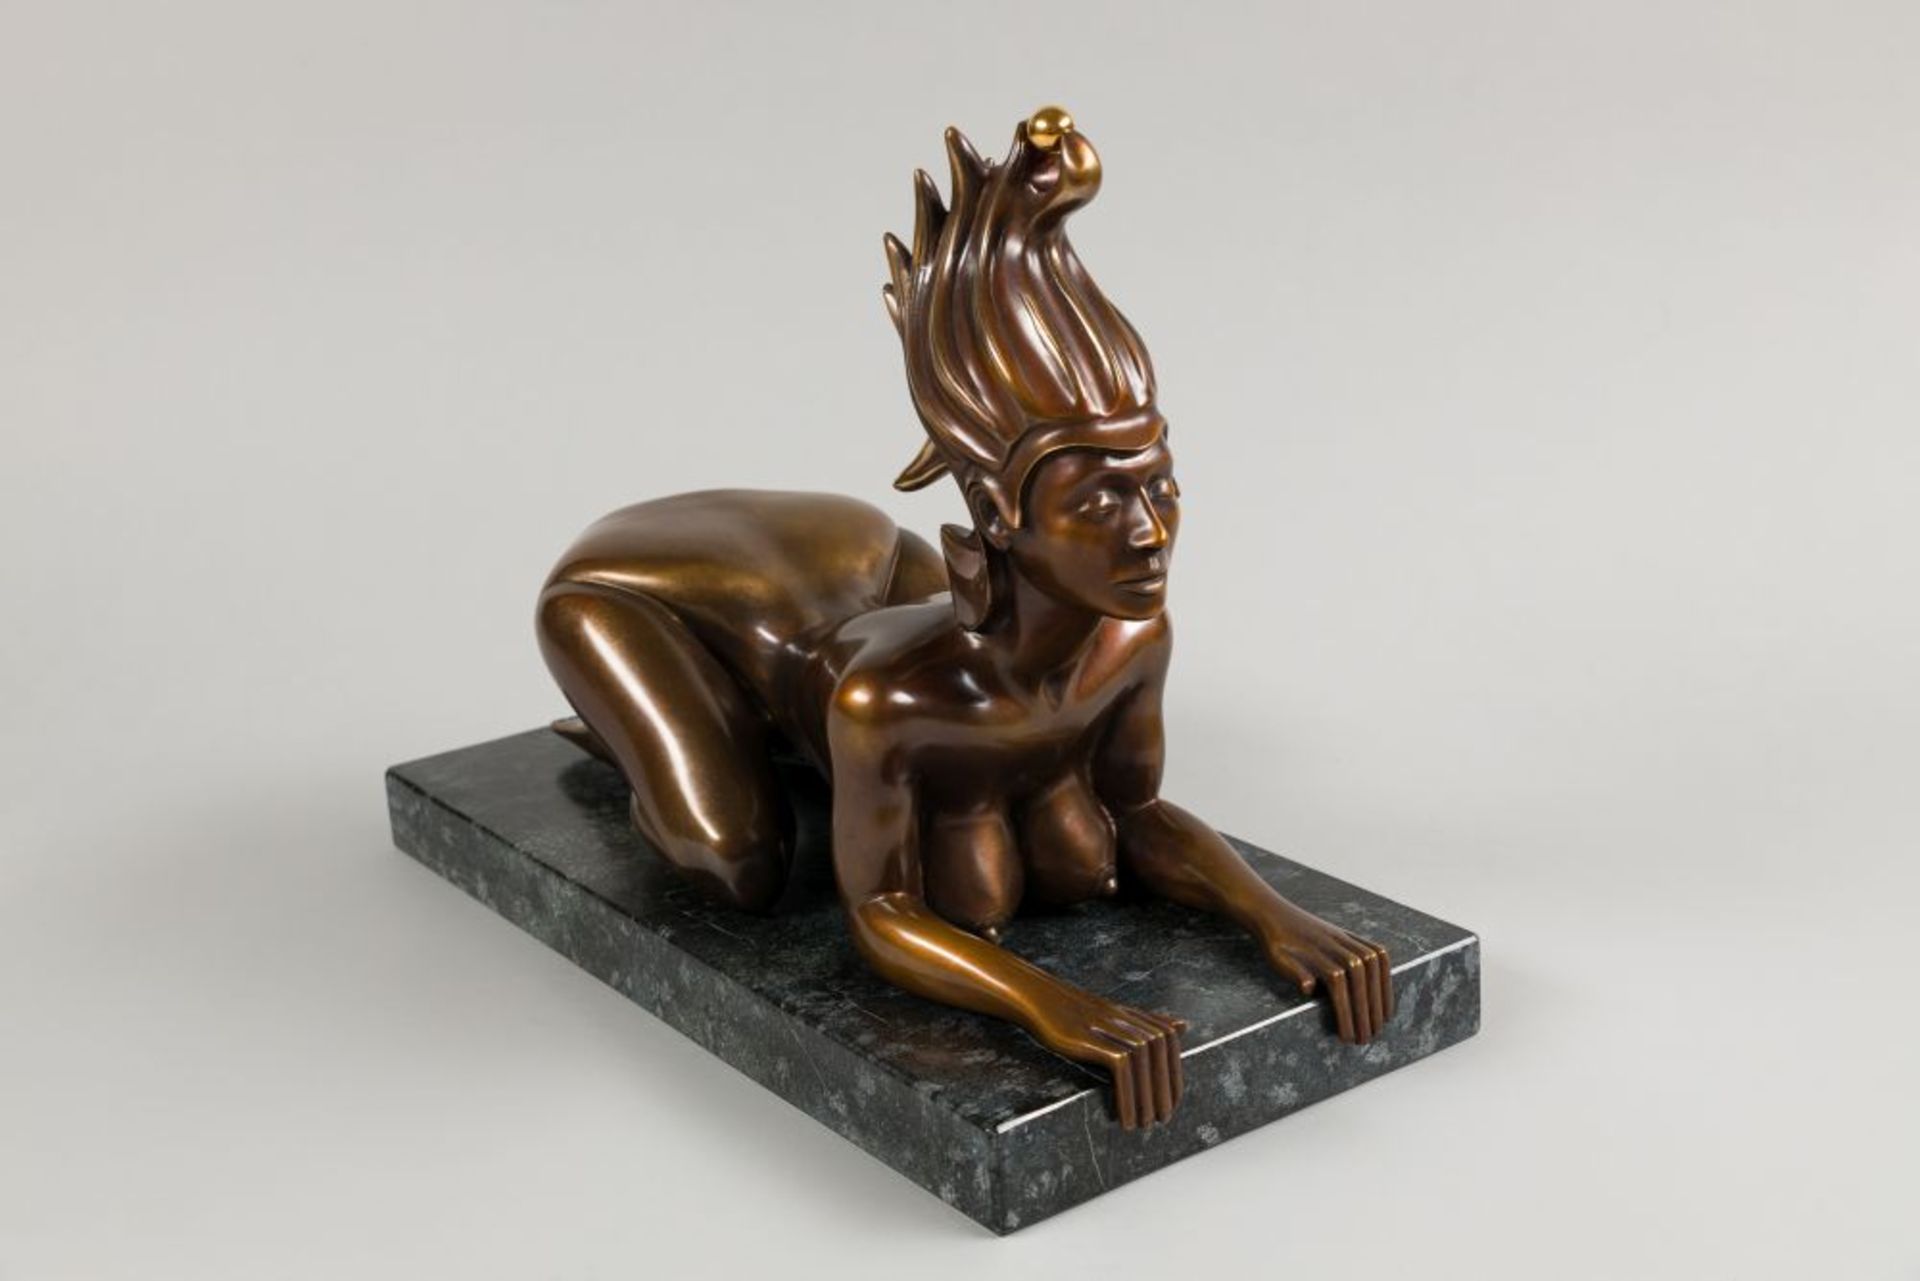 Viennese Sphinx Bronze on granite-pedestal Signed and numbered: 32/500 12,6 x 7,9 in